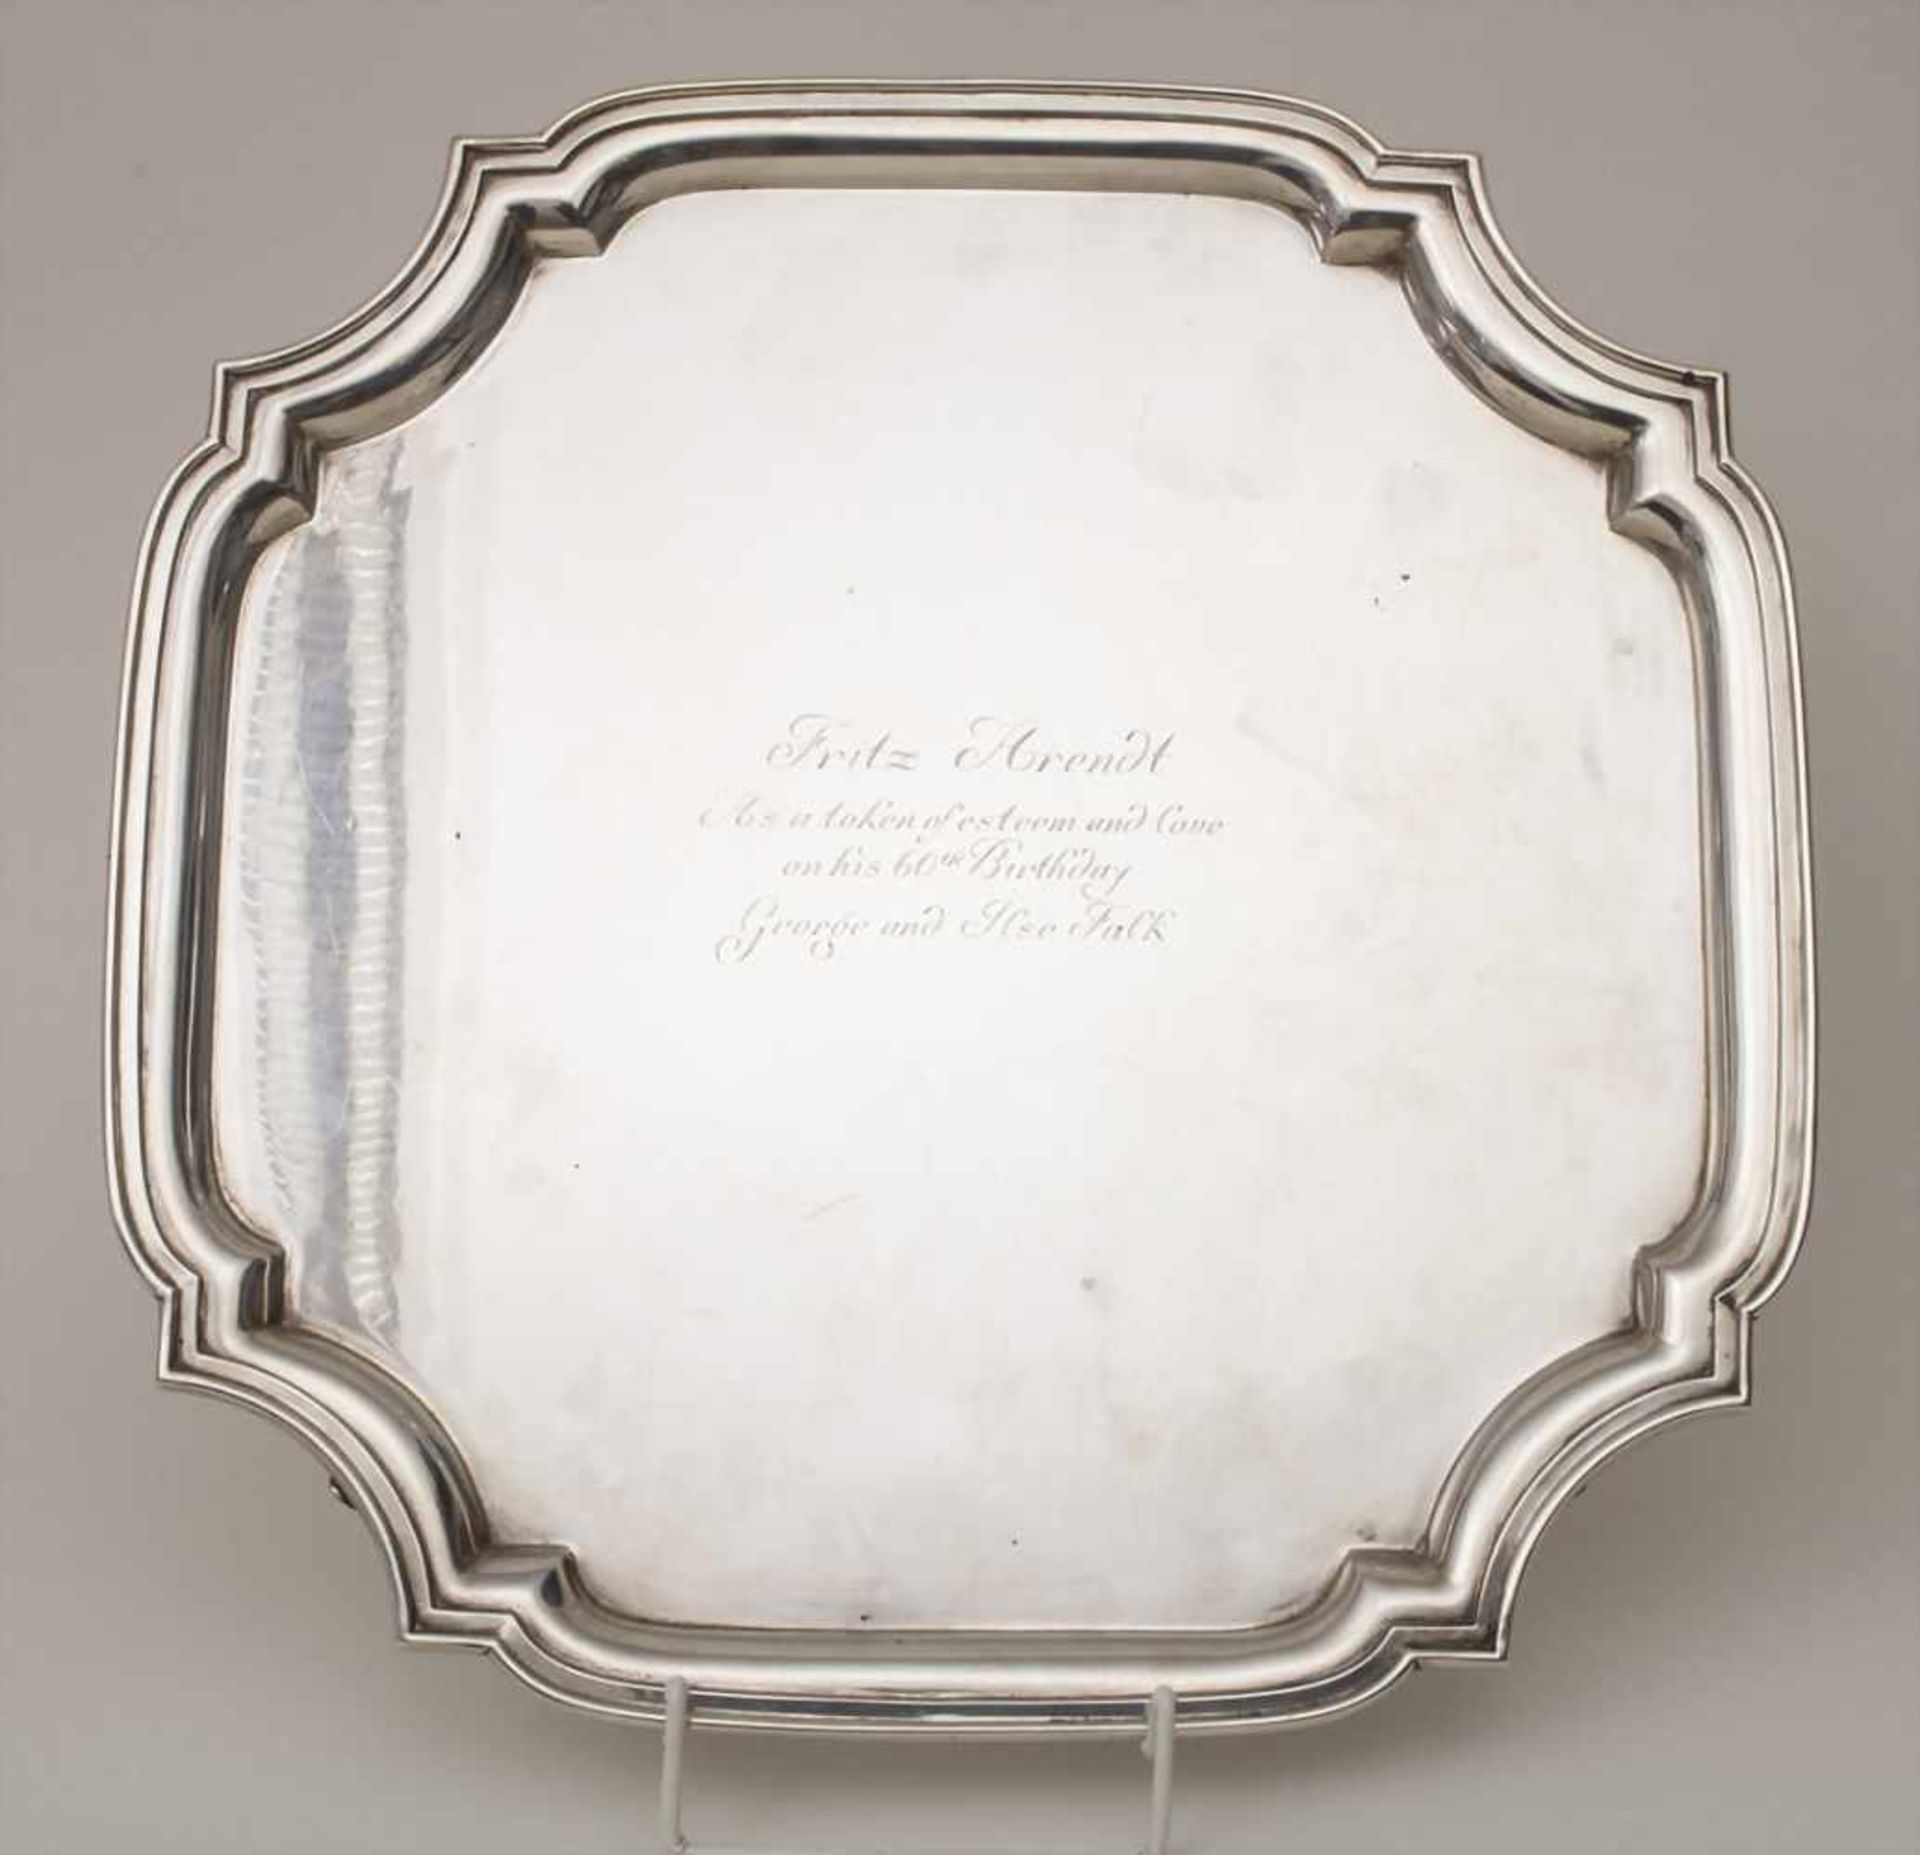 Tablett / A sterling silver plate, Tiffany & Co., 20. Jh.Material: Silber 925,Punzierung: